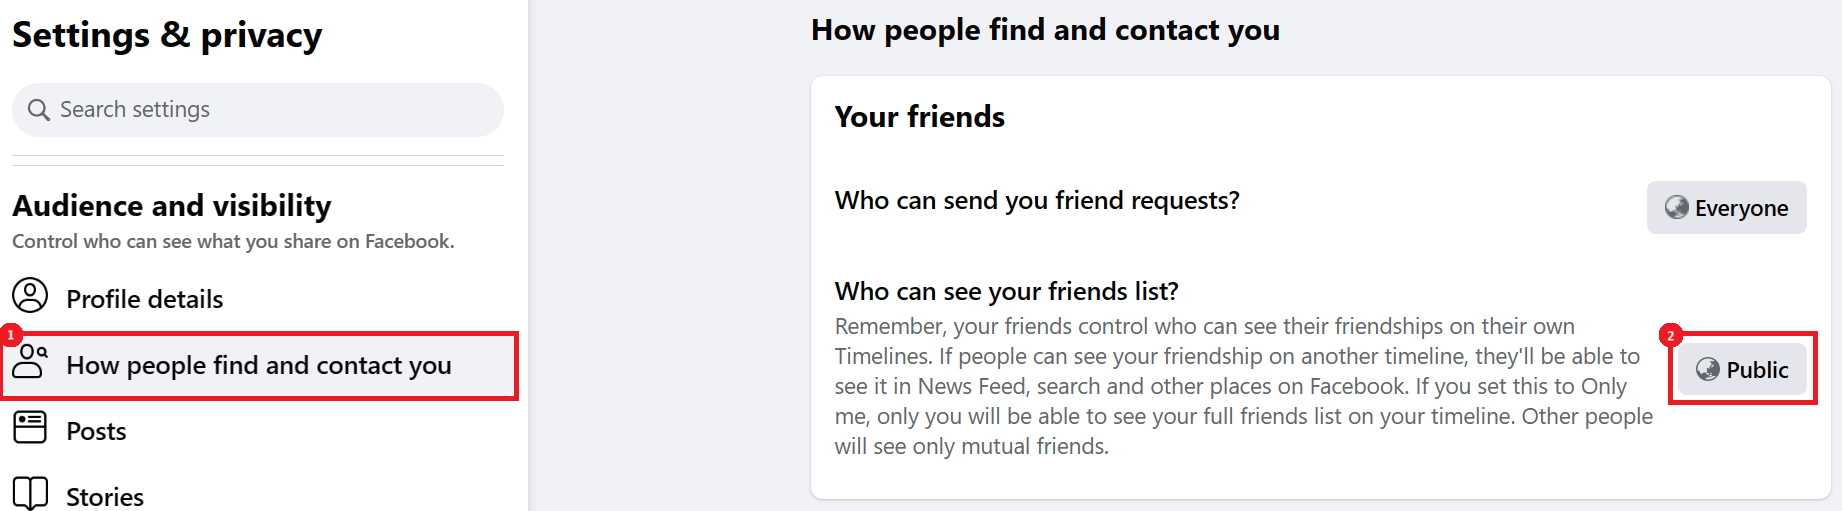 "How people find and contact you" option in Facebook for desktop.